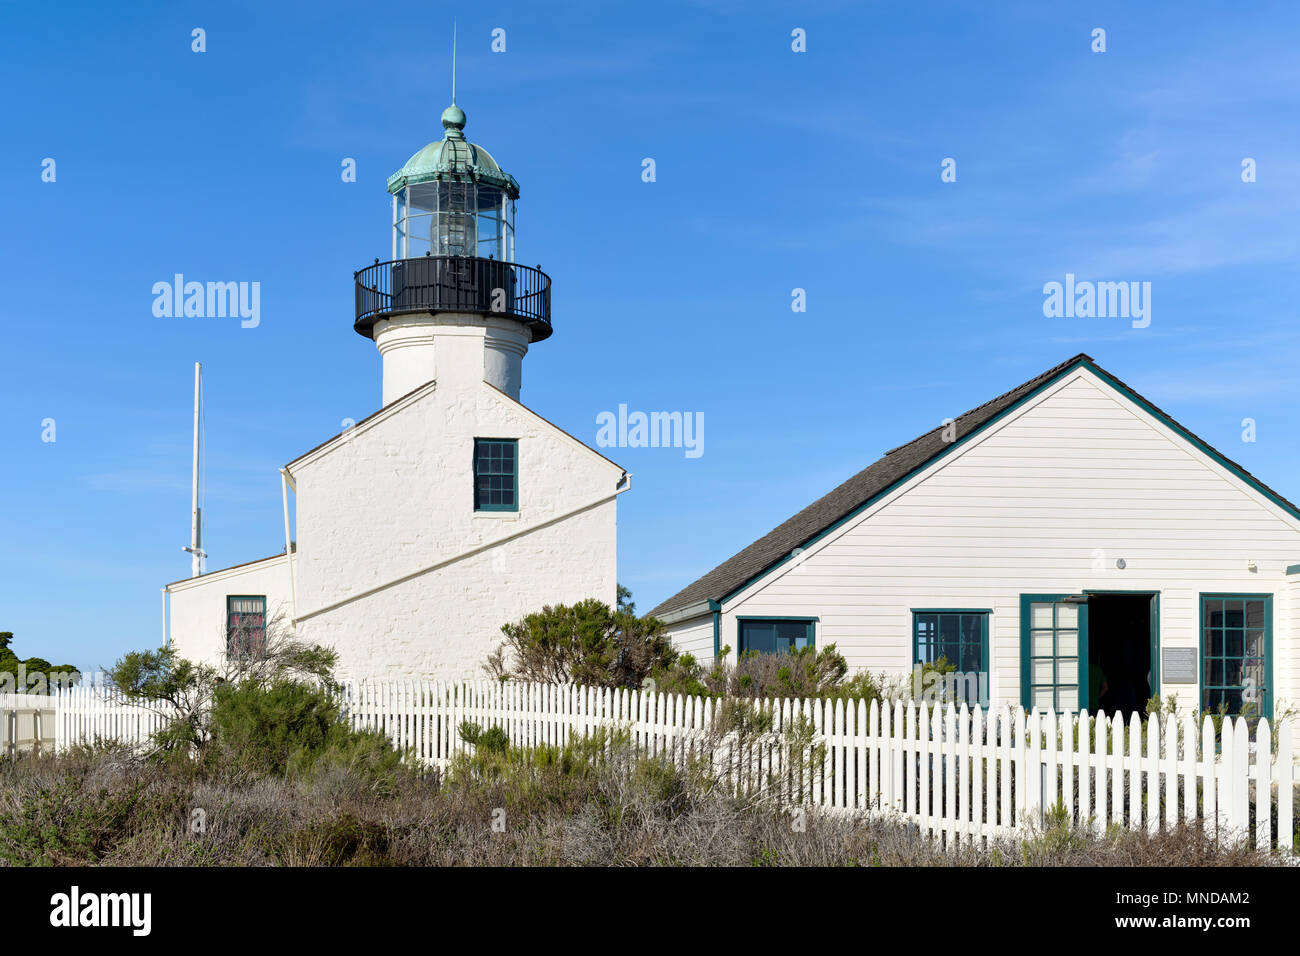 Point Loma Lighthouse - A full view of over-century-old Old Point Loma Lighthouse and outbuilding in Cabrillo National Monument, San Diego, CA, USA. Stock Photo